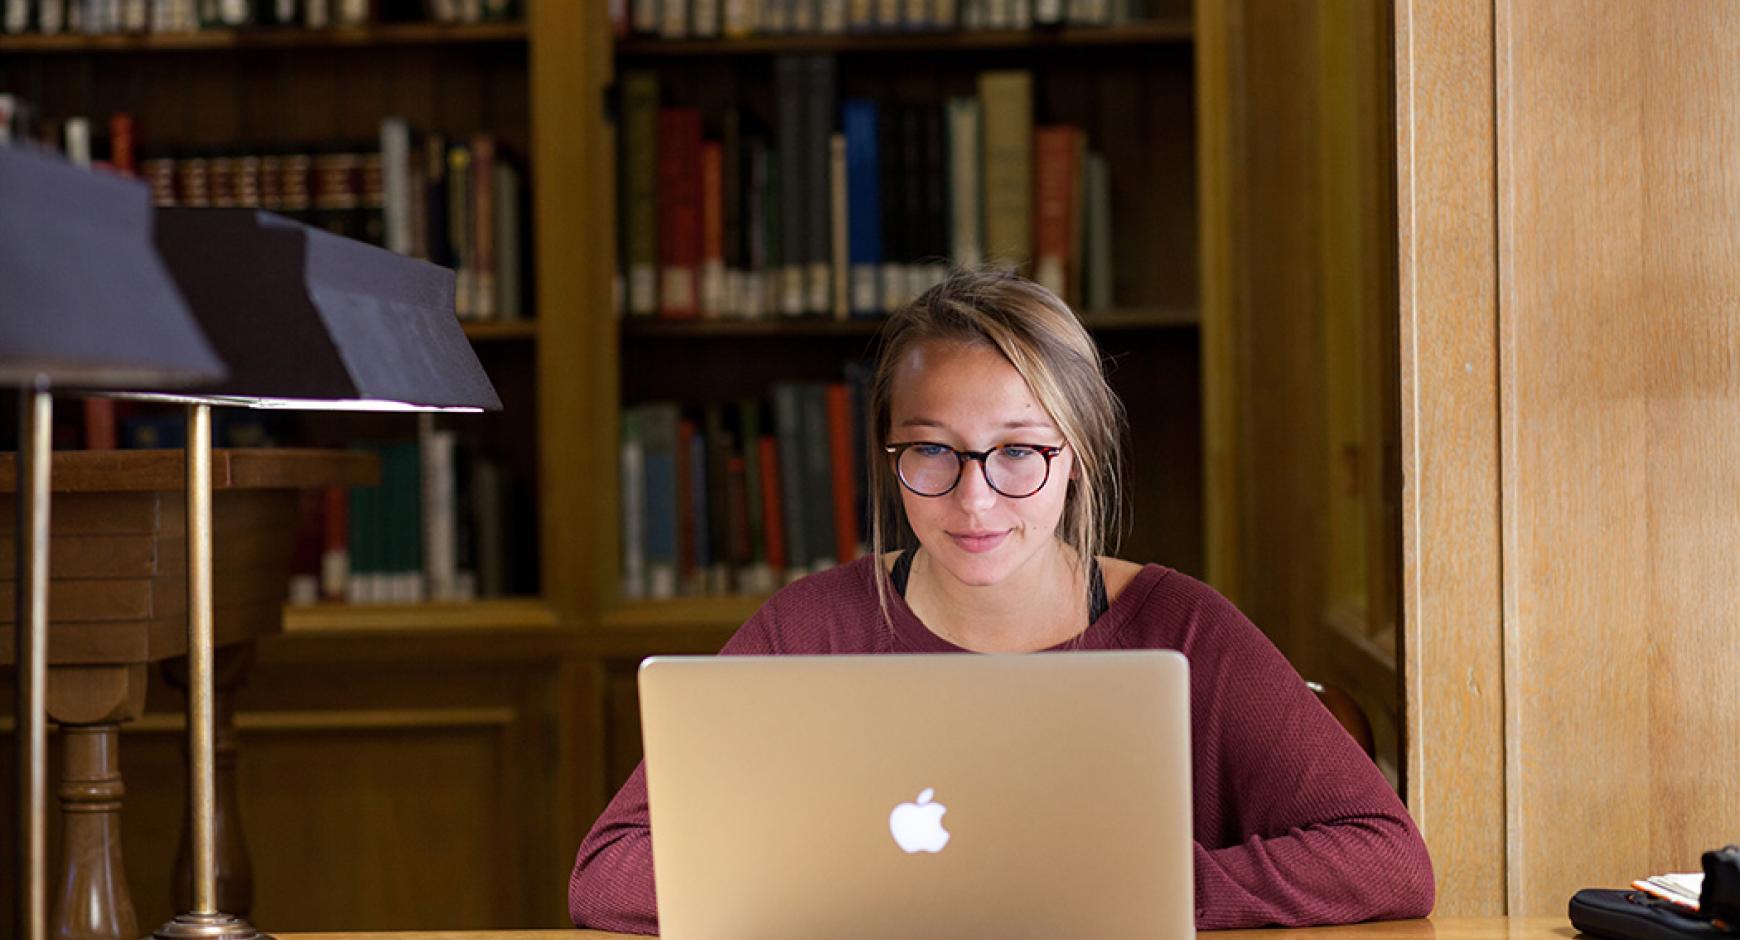 college student in glasses smiles while viewing laptop screen, books in background